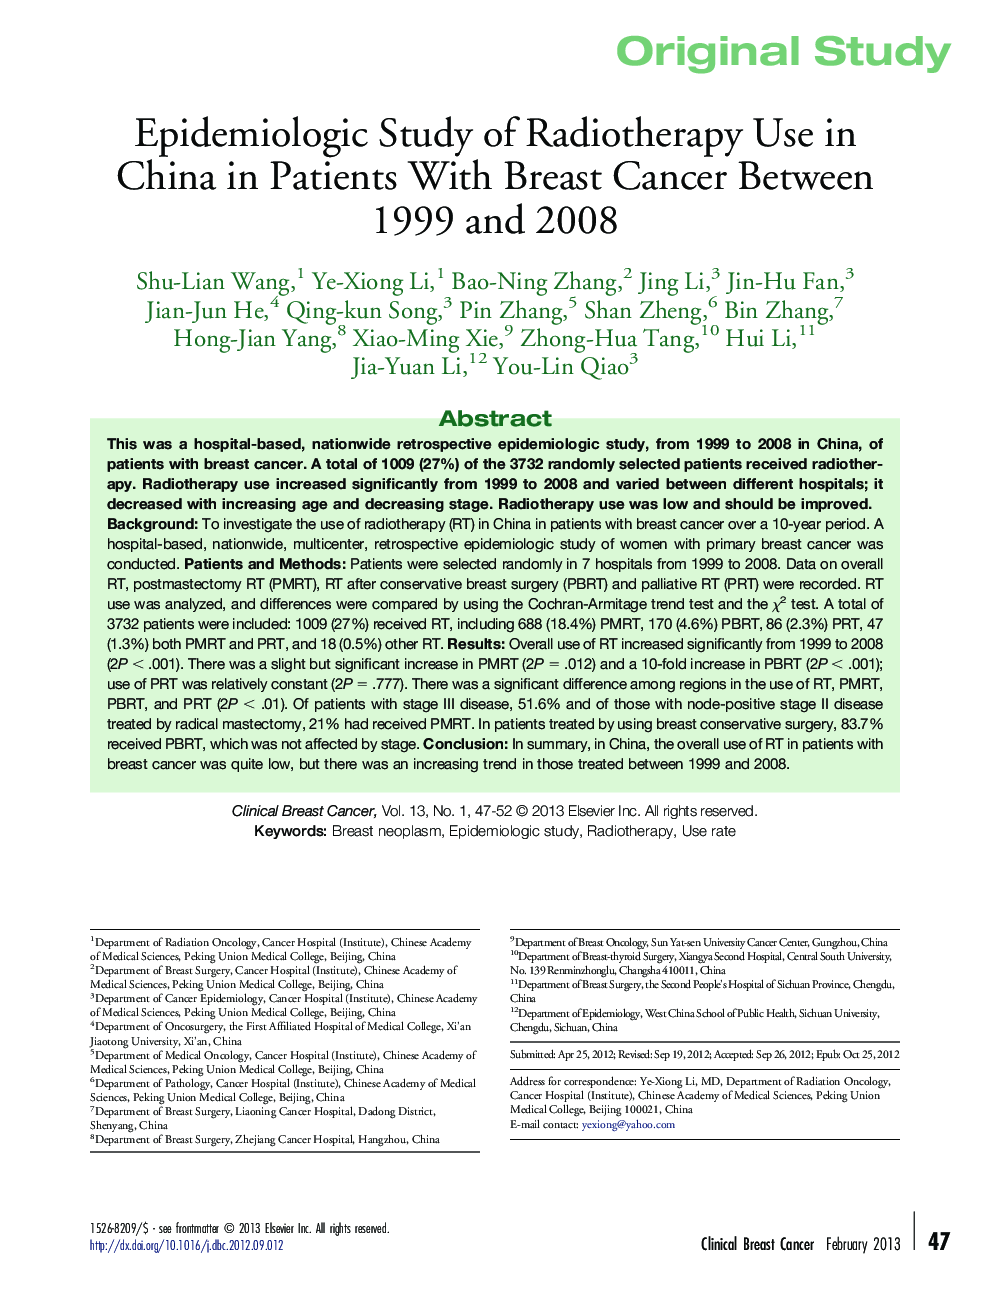 Epidemiologic Study of Radiotherapy Use in China in Patients With Breast Cancer Between 1999 and 2008